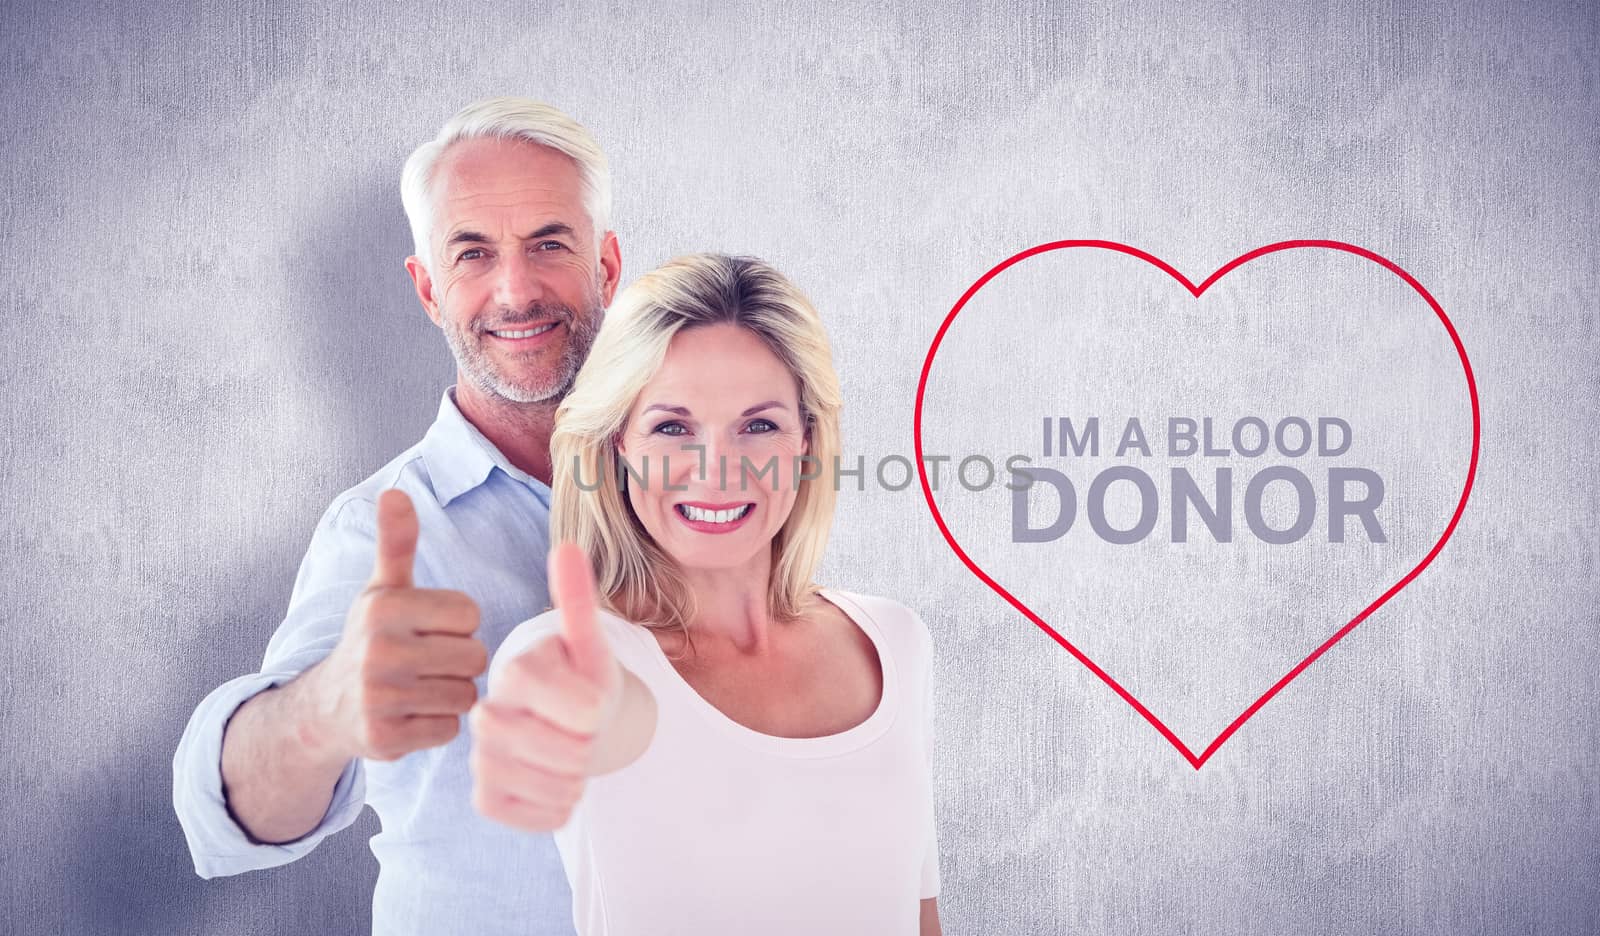 Composite image of smiling couple showing thumbs up together by Wavebreakmedia